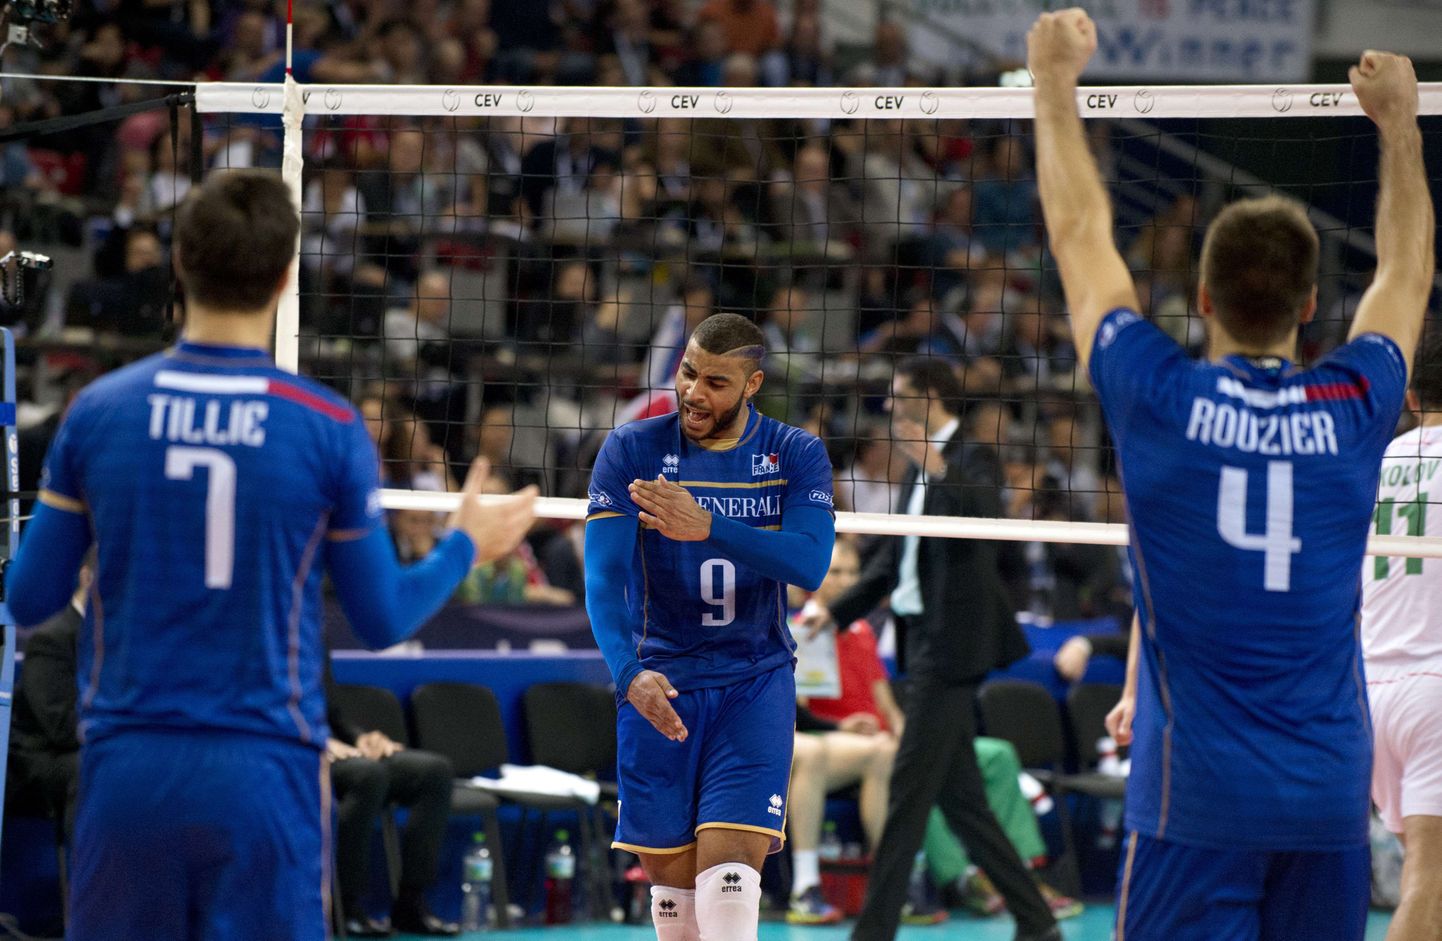 France's Earvin Nhapeth (C) celebrates with teammates during the European Volleyball Championships semi-final match between Bulgaria and France in Sofia on October 17, 2015. AFP PHOTO / NIKOLAY DOYCHINOV